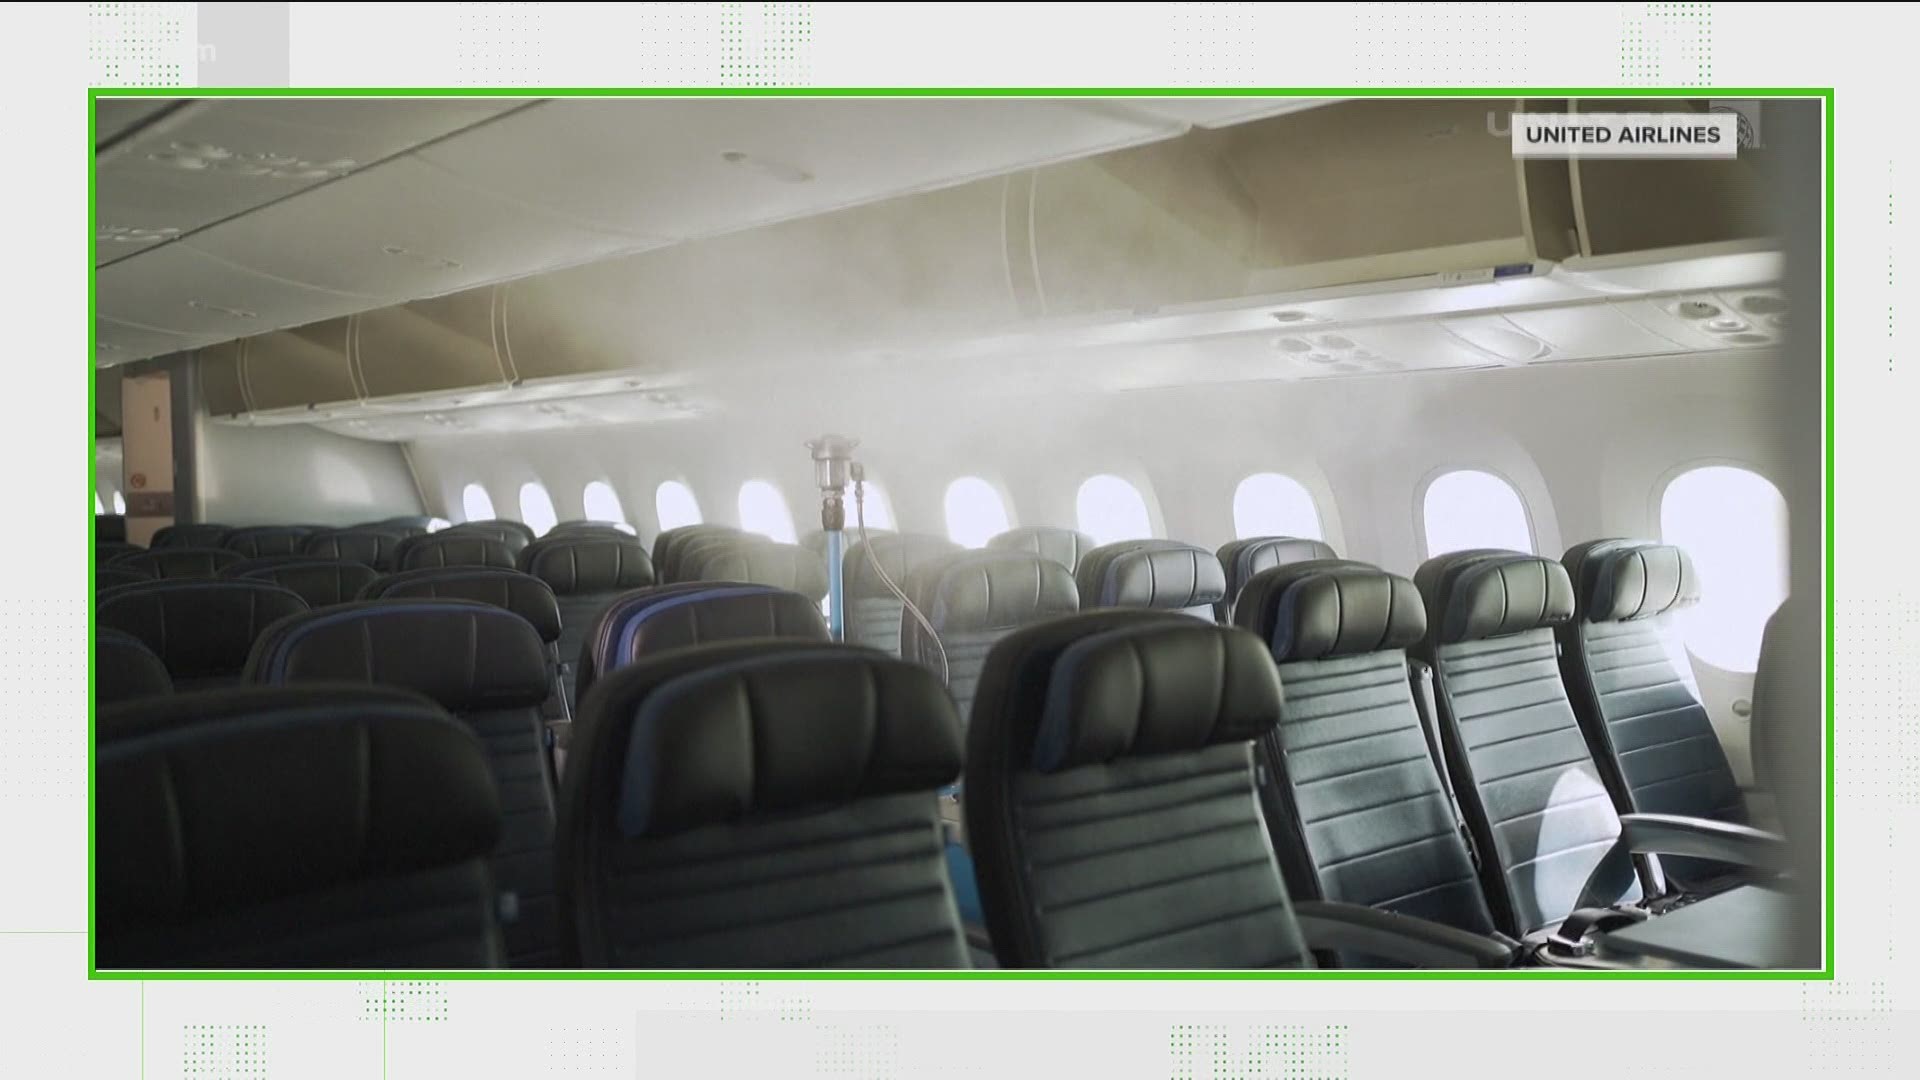 Scientists studied air quality in different public locations and found fewer particles in the air make planes safer than most.